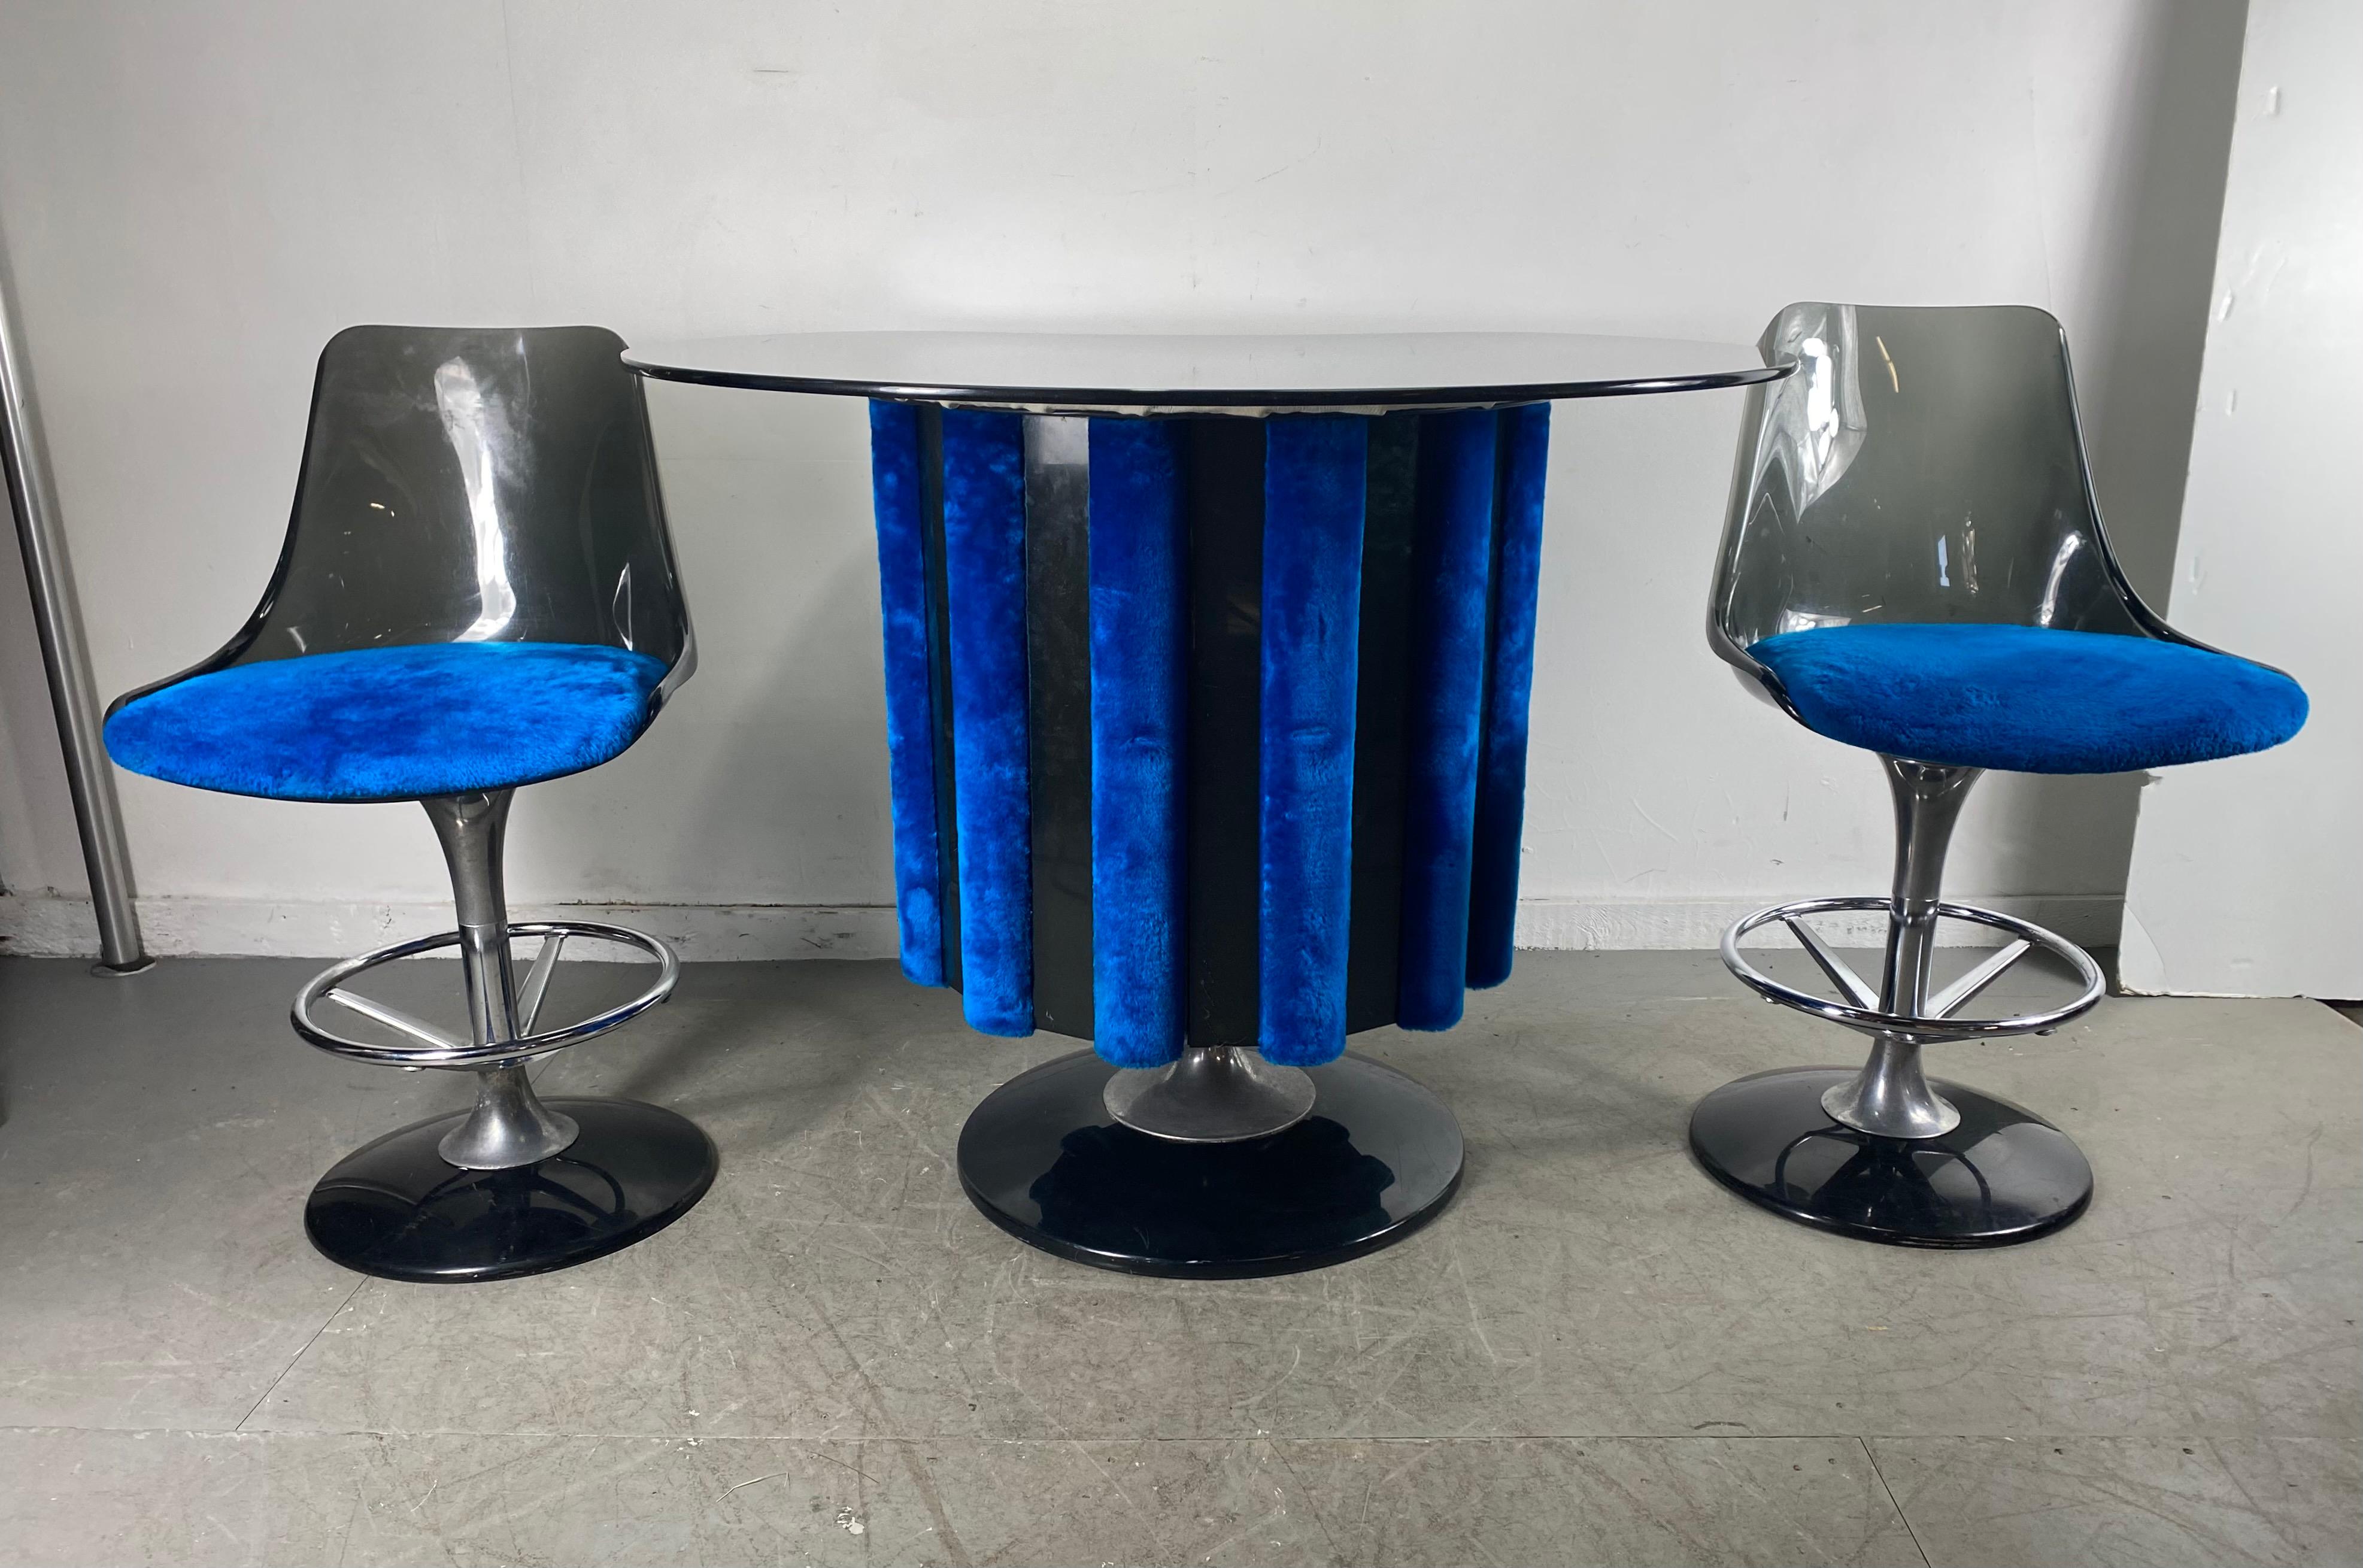 A midcentury Space Age three-piece pedestal dry bar with two accompanying bar stools from Chromecraft. Created with alternating acrylic panels and rolled blue fur fabric panels. Supported by a chrome and black base. The stools are smoked gray